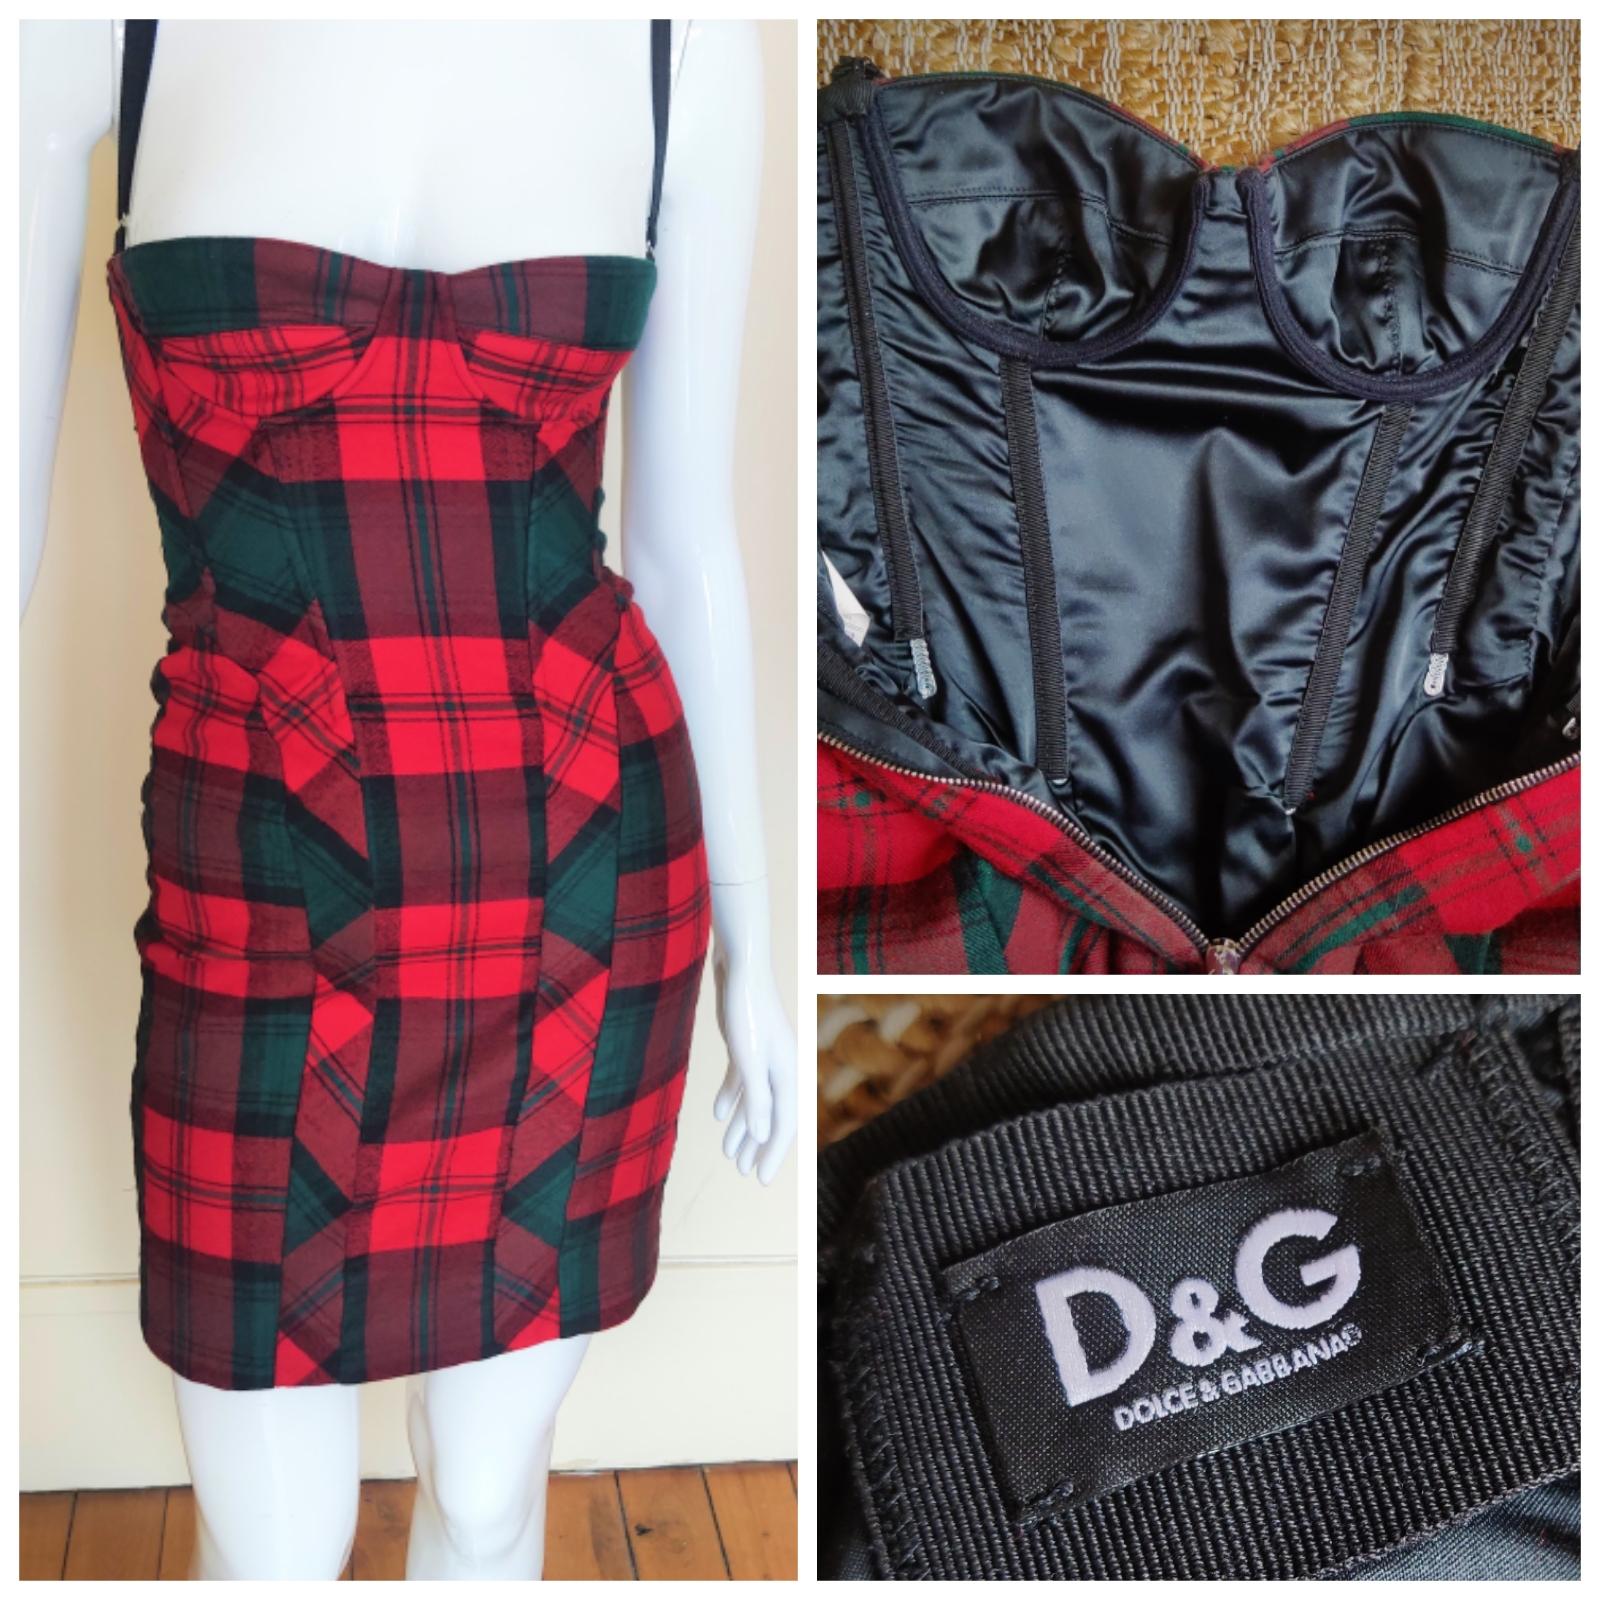 Tartan bustier dress by Dolce and Gabbana!
With metal fishbone. 
It can be worn with the straps and without.

EXCELLENT condition!

SIZE
XS.
Marked size: Italian 38. 
Length: 84 cm / 33.1 inch
Bust: 34 cm / 13.4 inch
Waist: 28 cm / 11 inch
Hip: 41